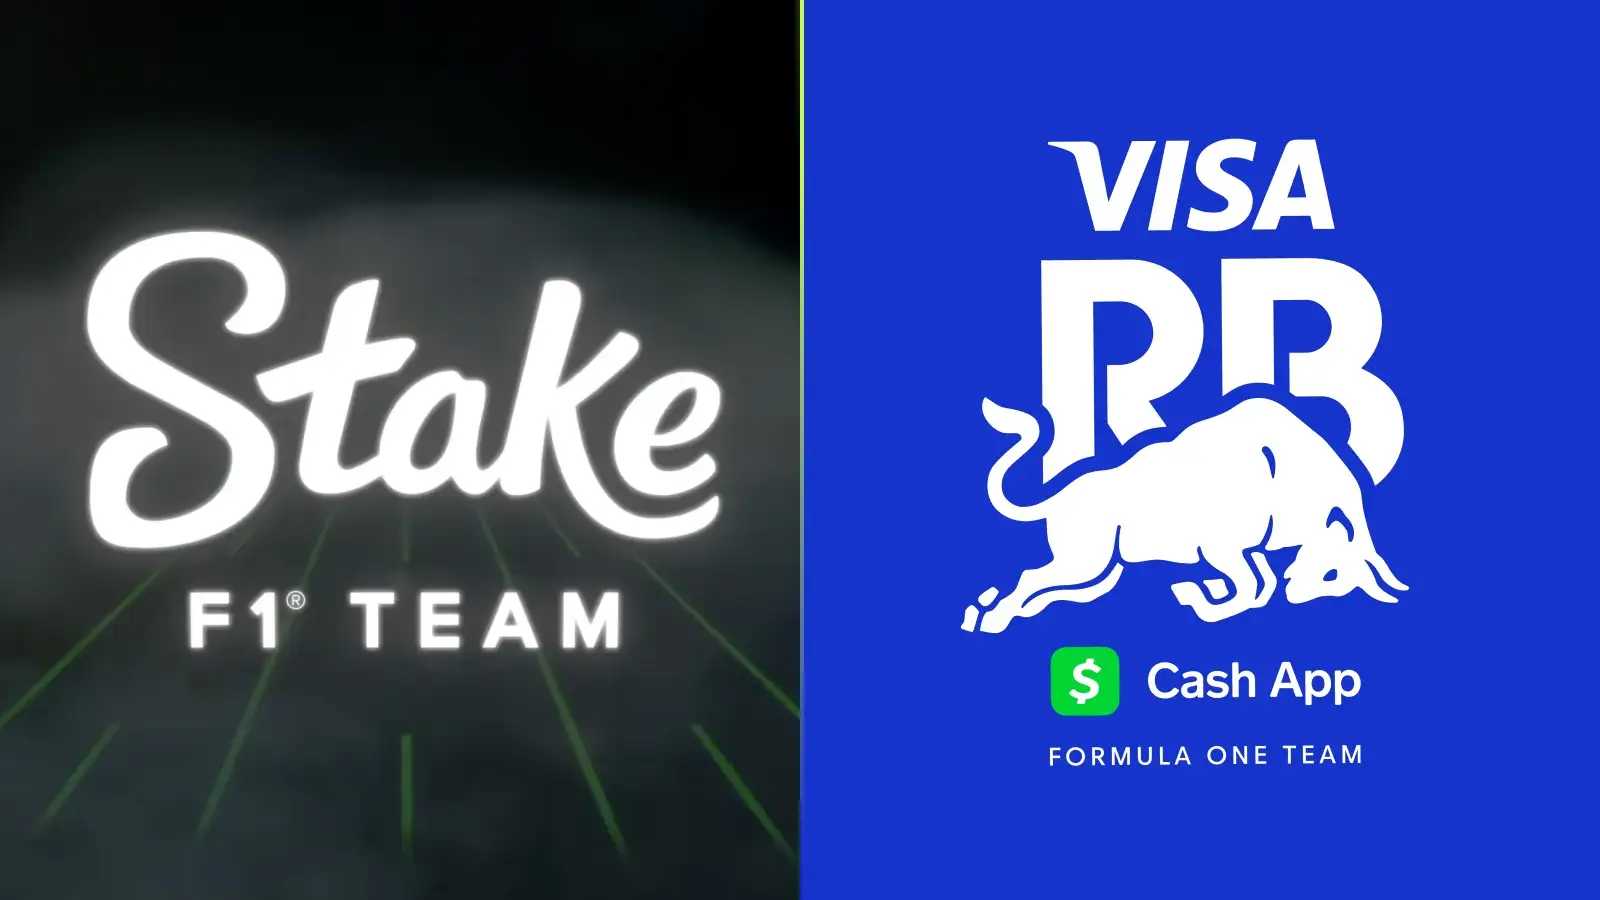 The Stake F1 and Visa Cash App RB brand